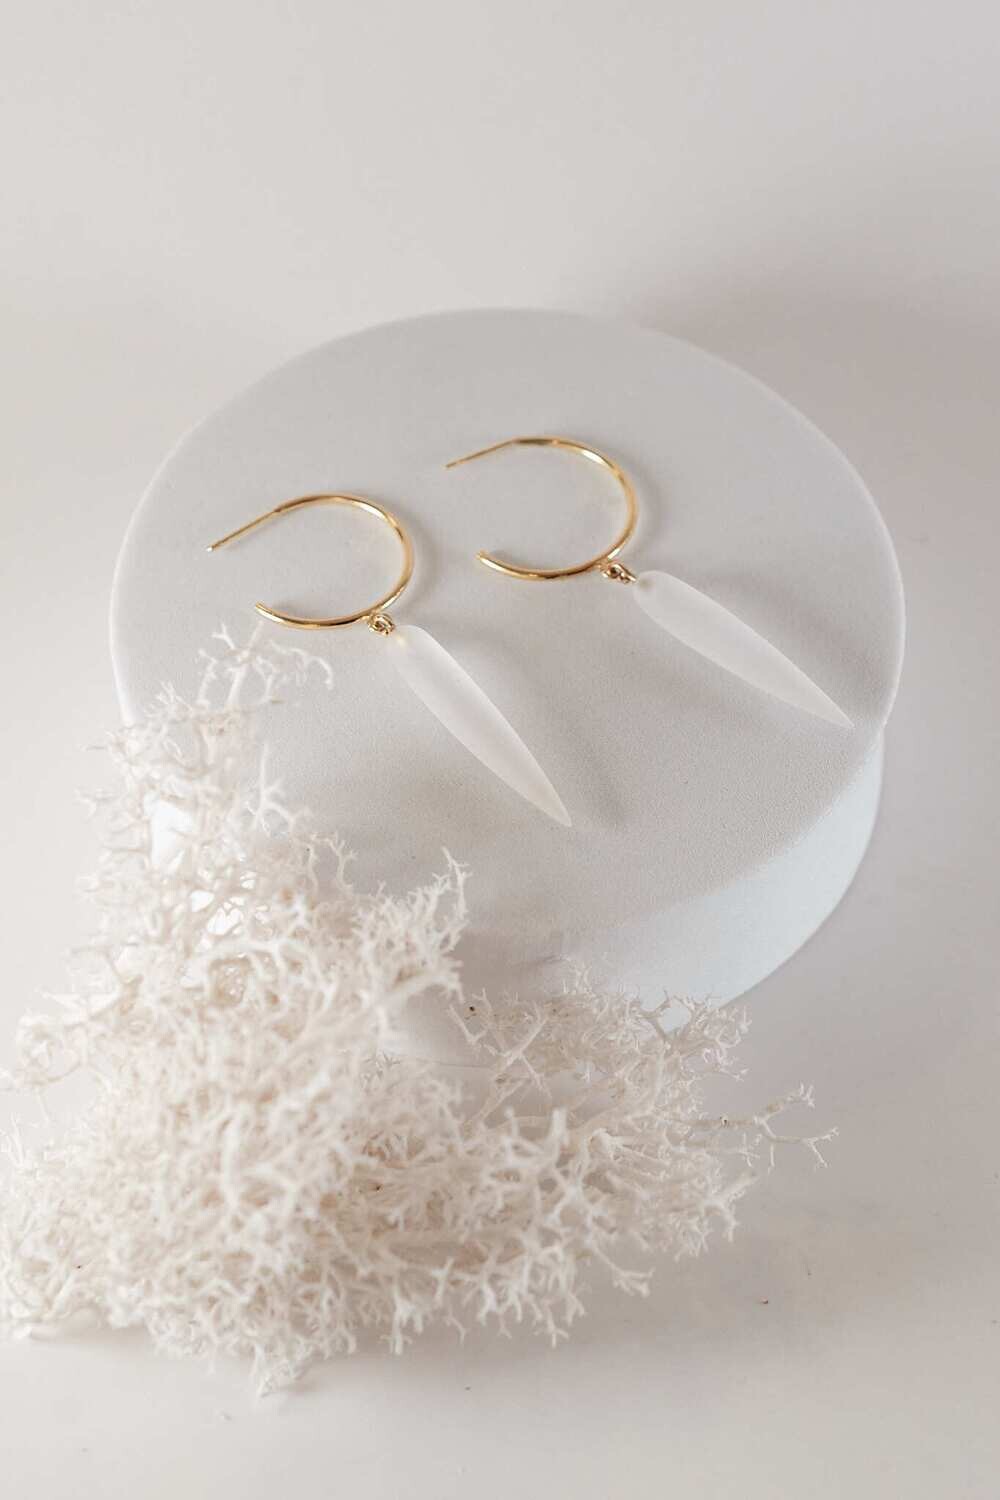 Frosted Quartz with 18K Gold Hoops, Large